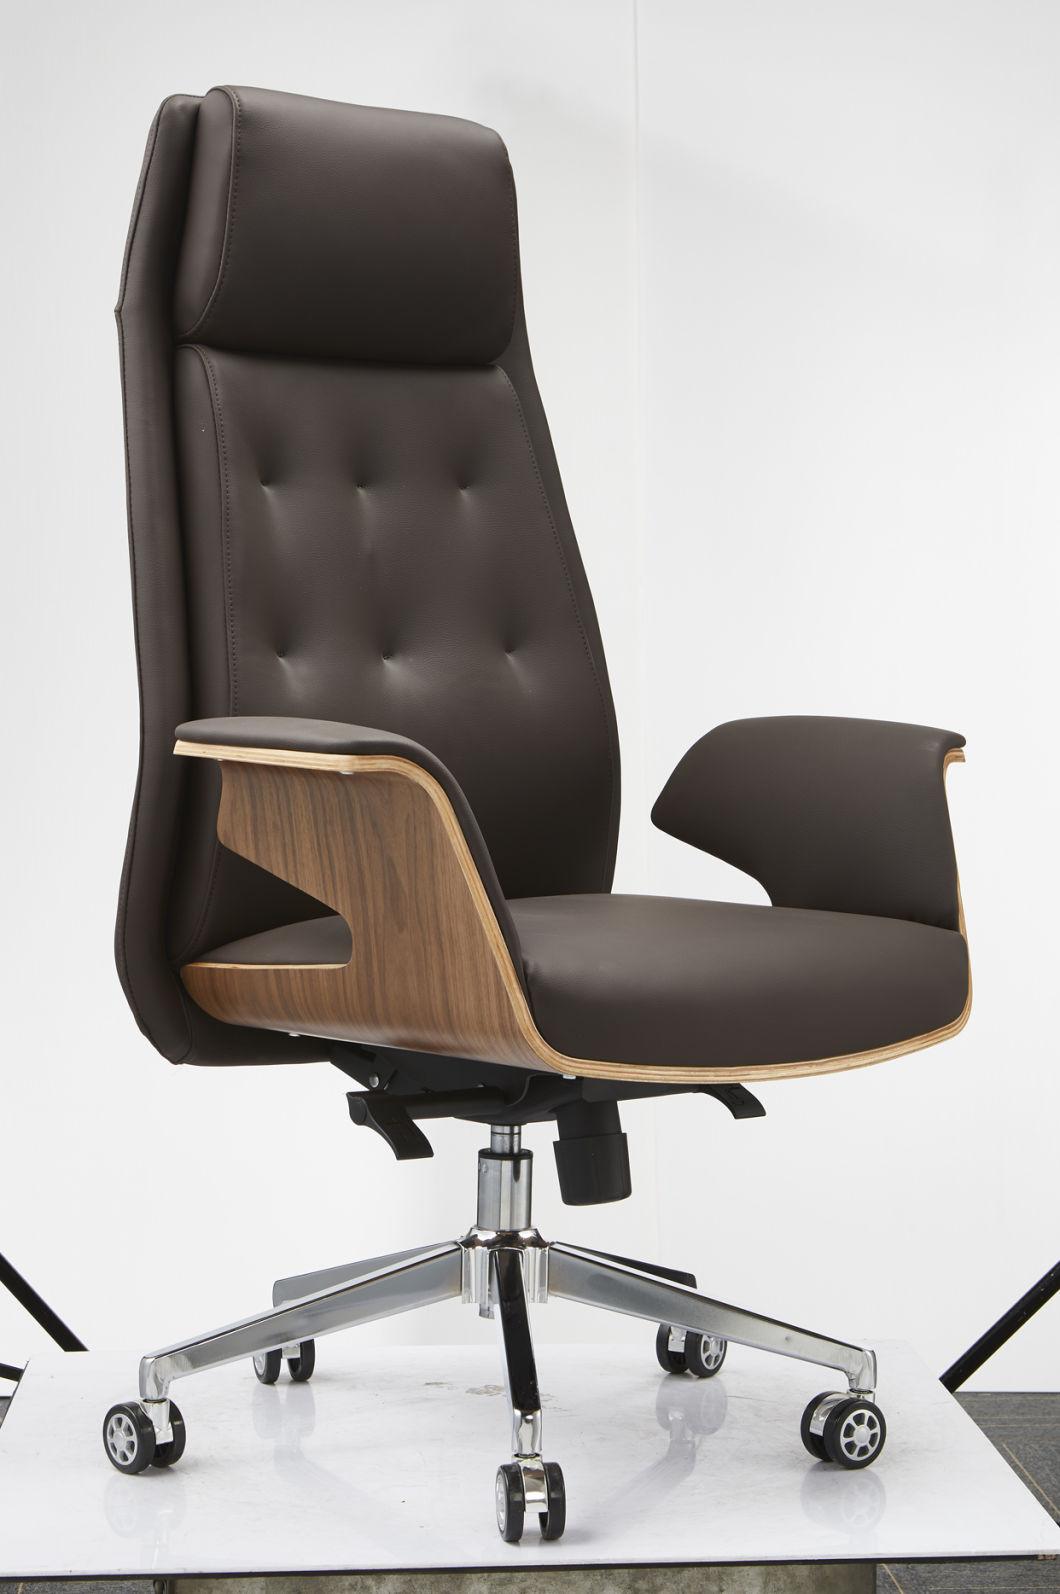 Exquisite Office Chair Modern Ergonomic Adjustable High Swivel Computer Leather Office Chair